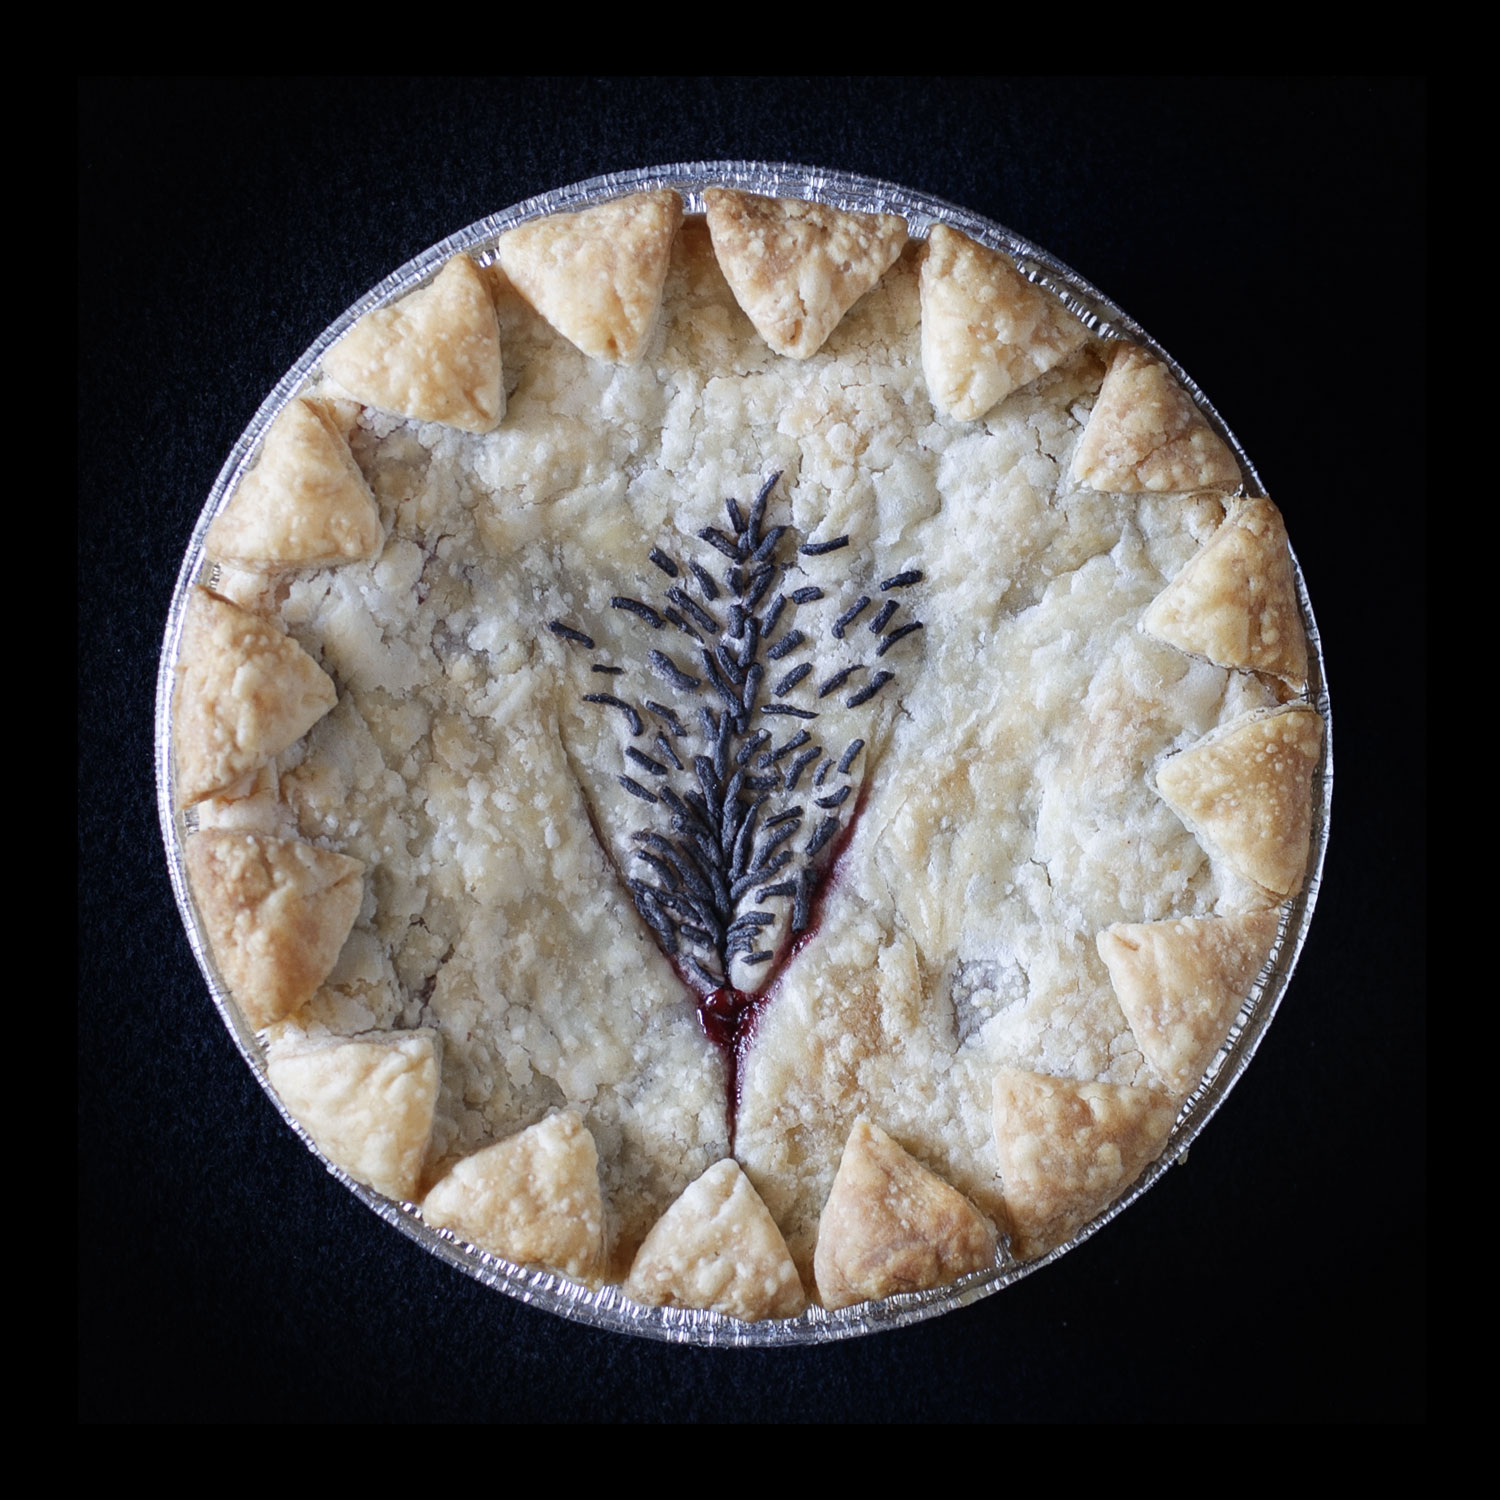 A baked pie on a black background. The pie is adorned with a frontal view of a human vulva with dark pubic hair all made from pie dough. 